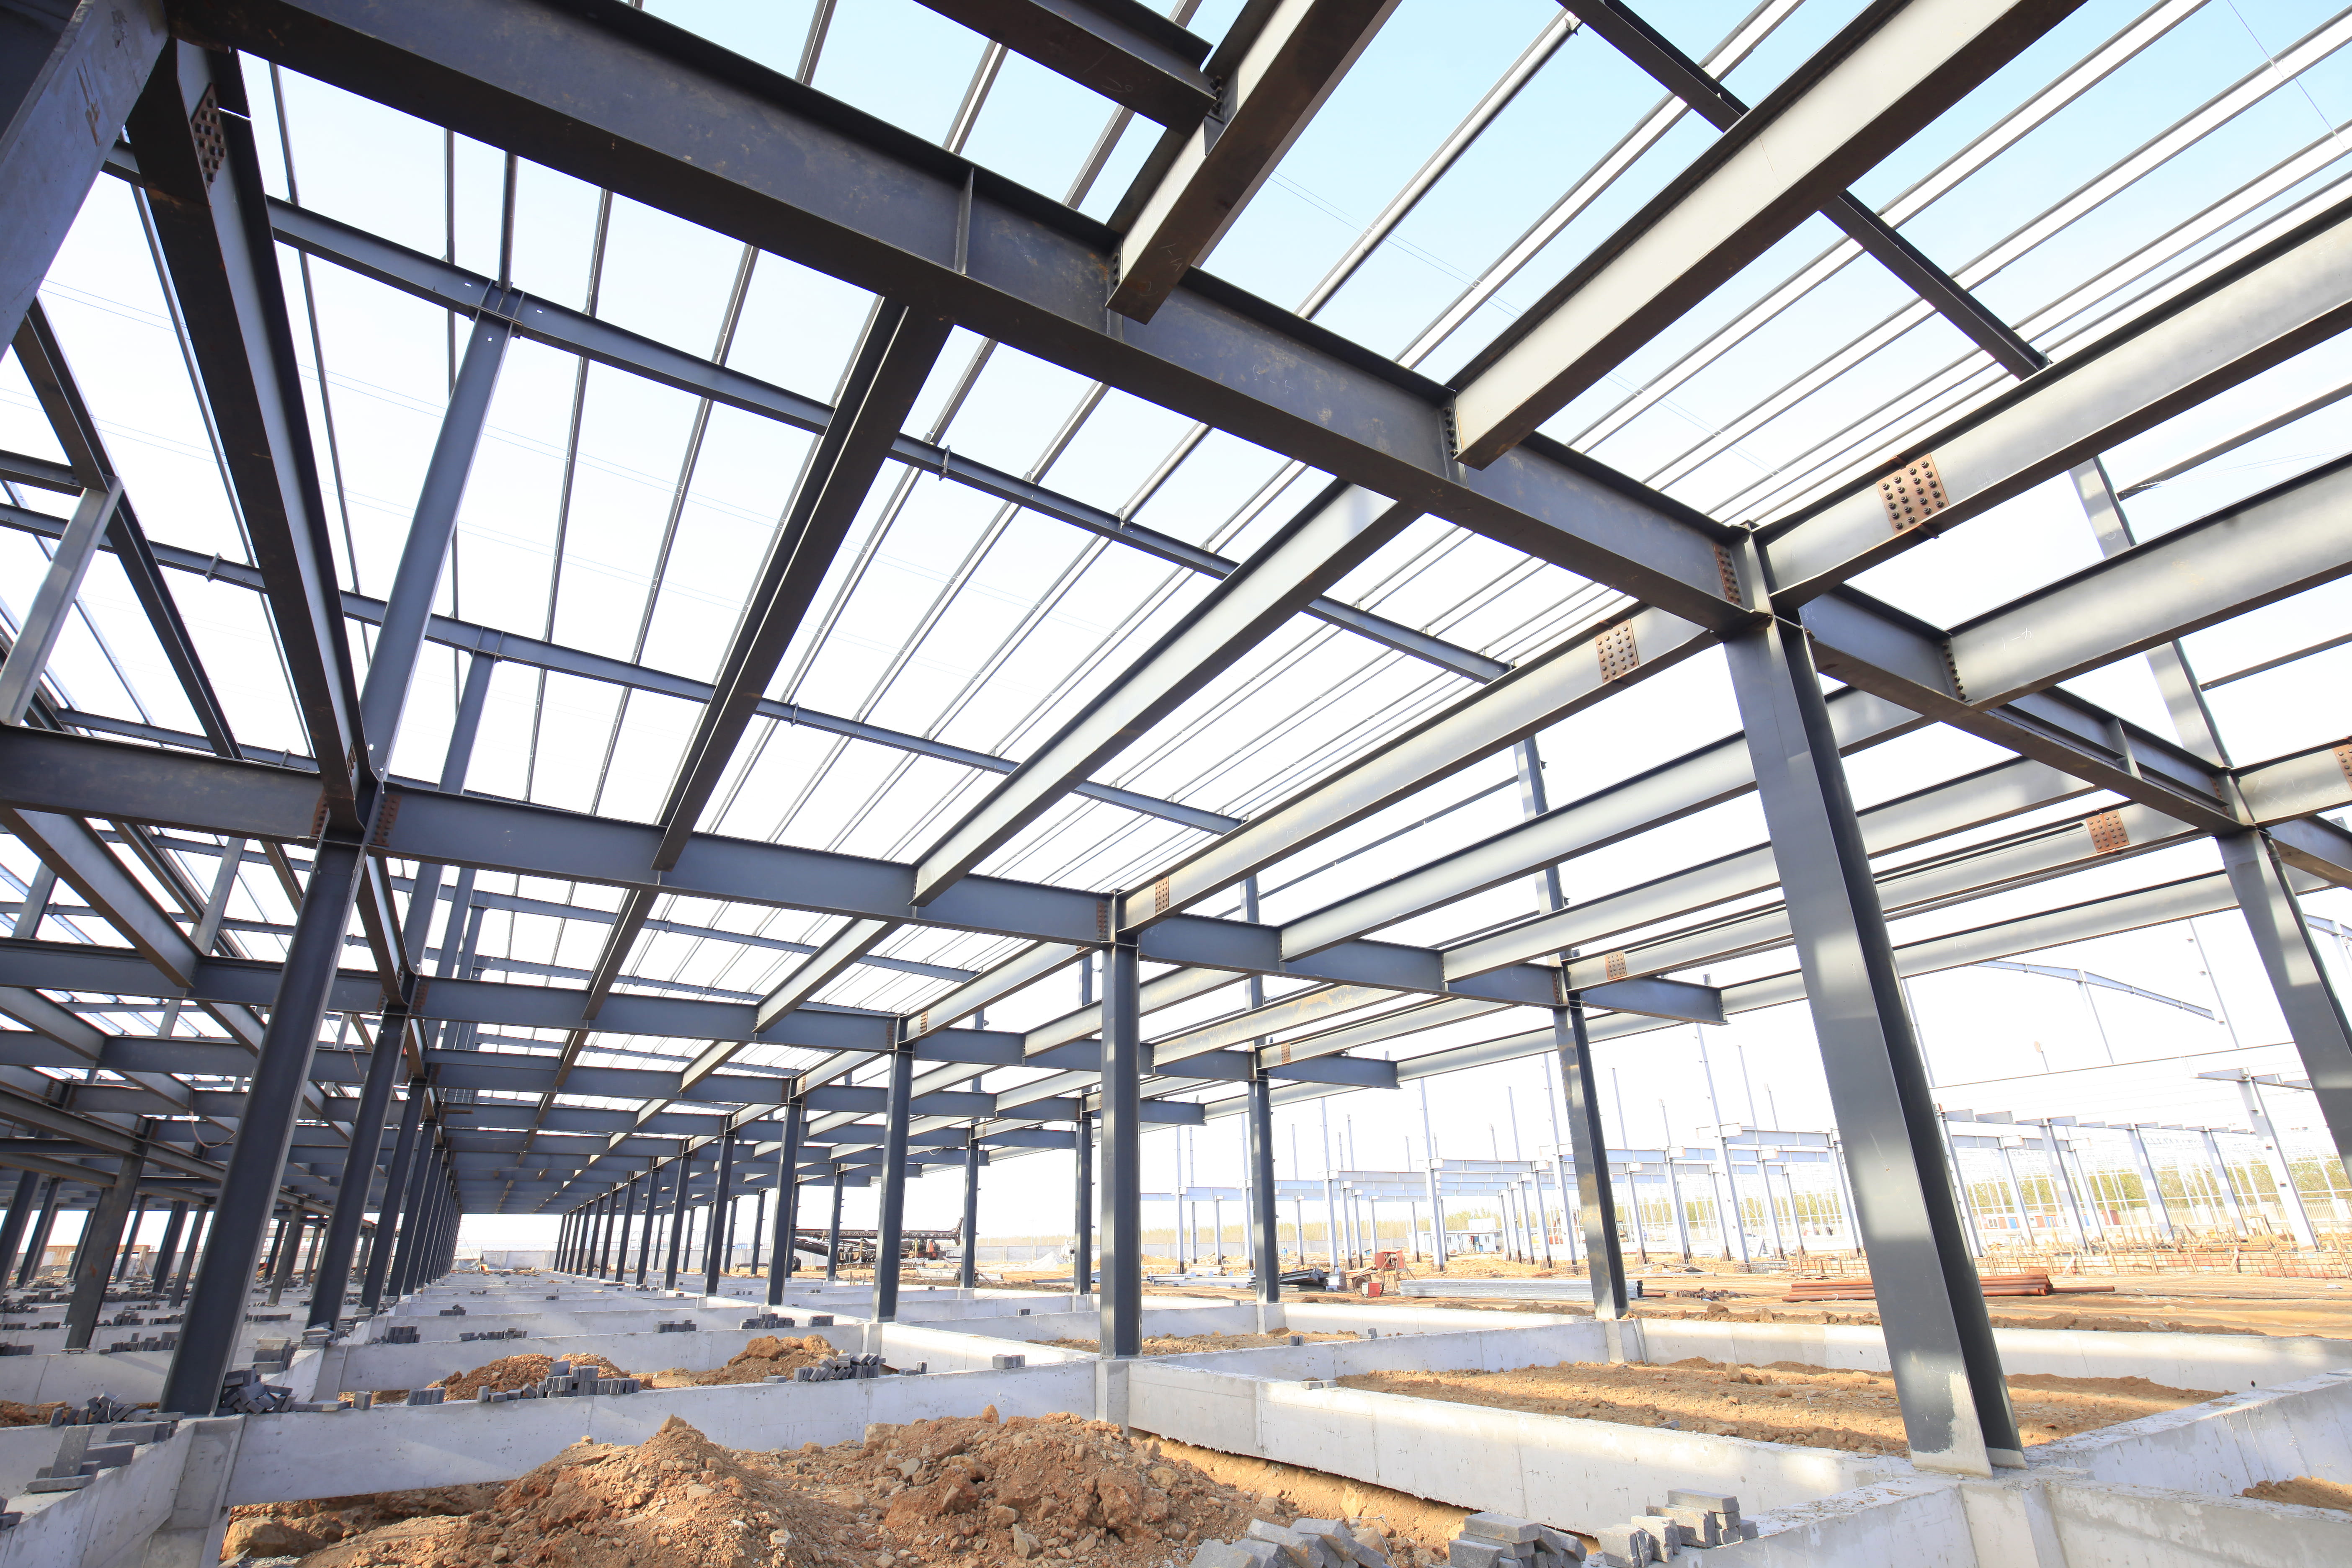 A steel frame structure for a large building requiring multiple contractors to work on project